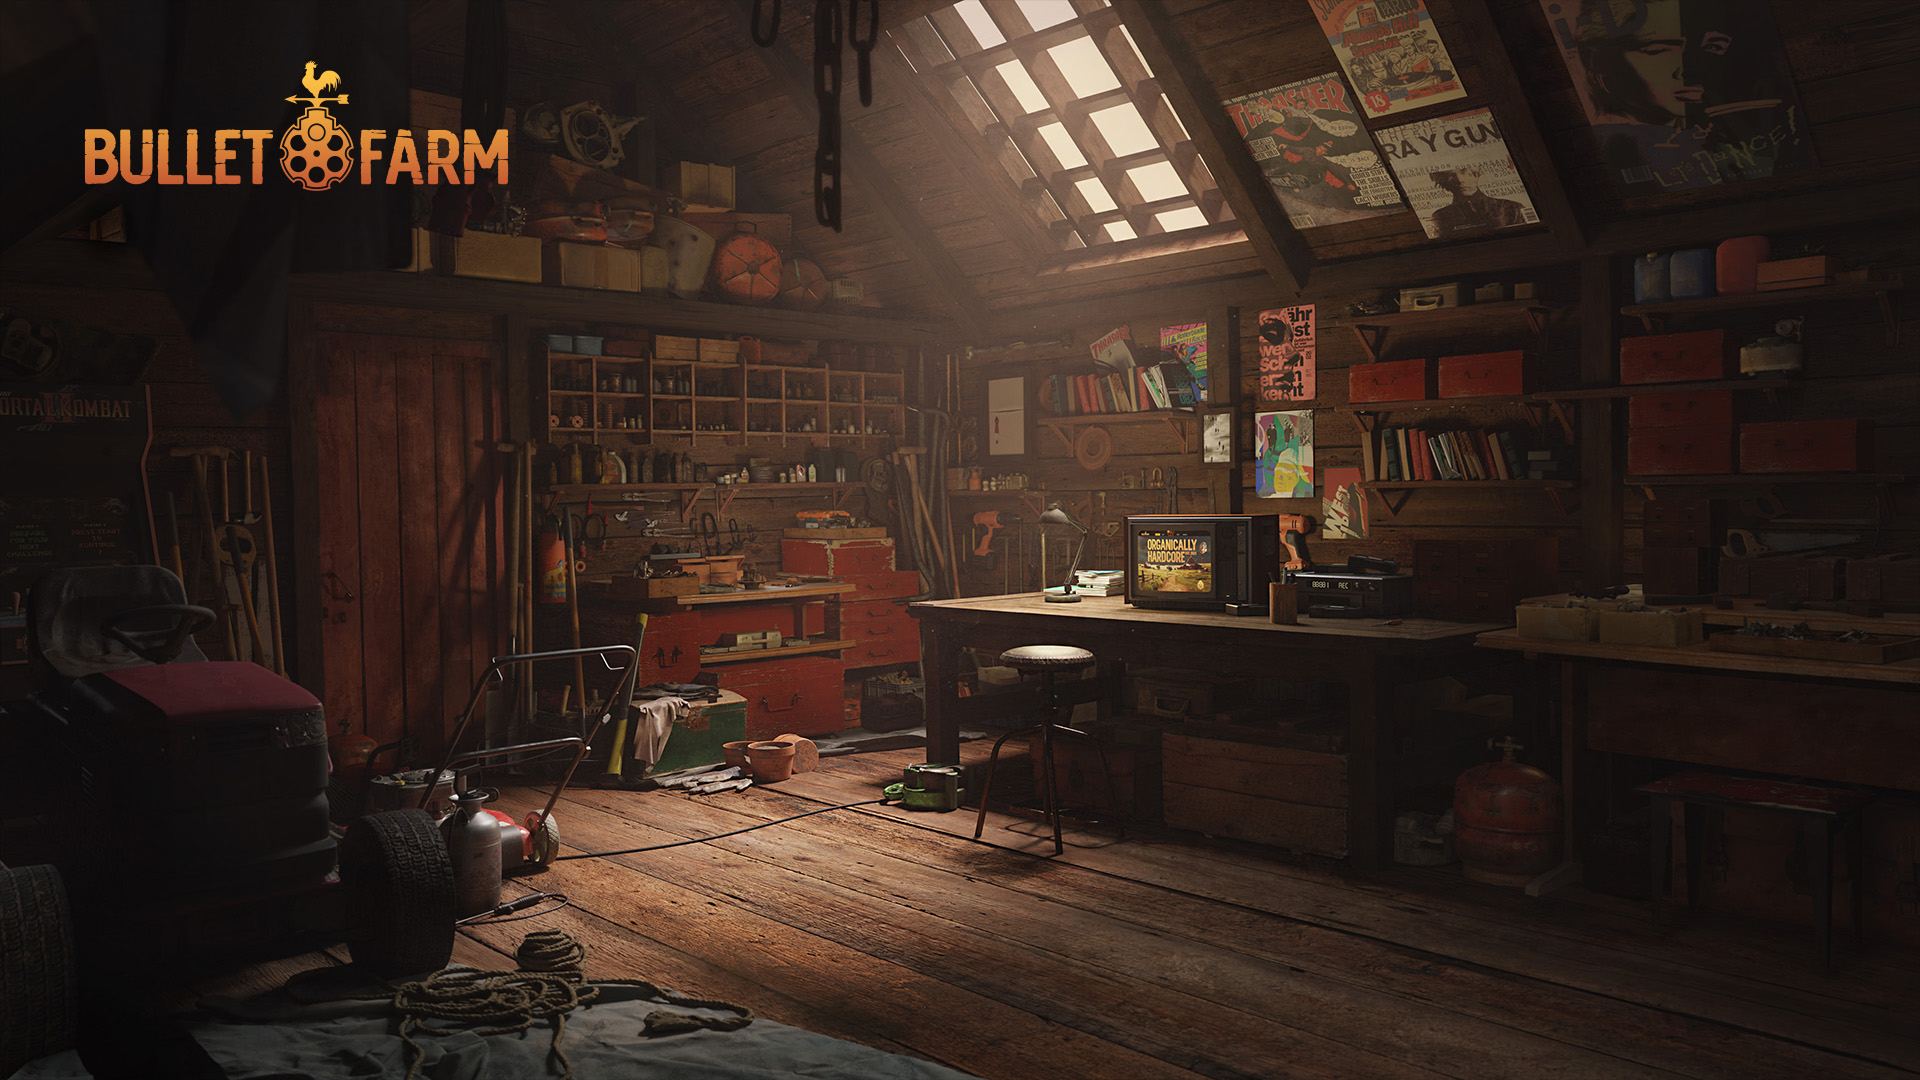 BulletFarm promo image - a rustic workshop with an old TV on a workbench